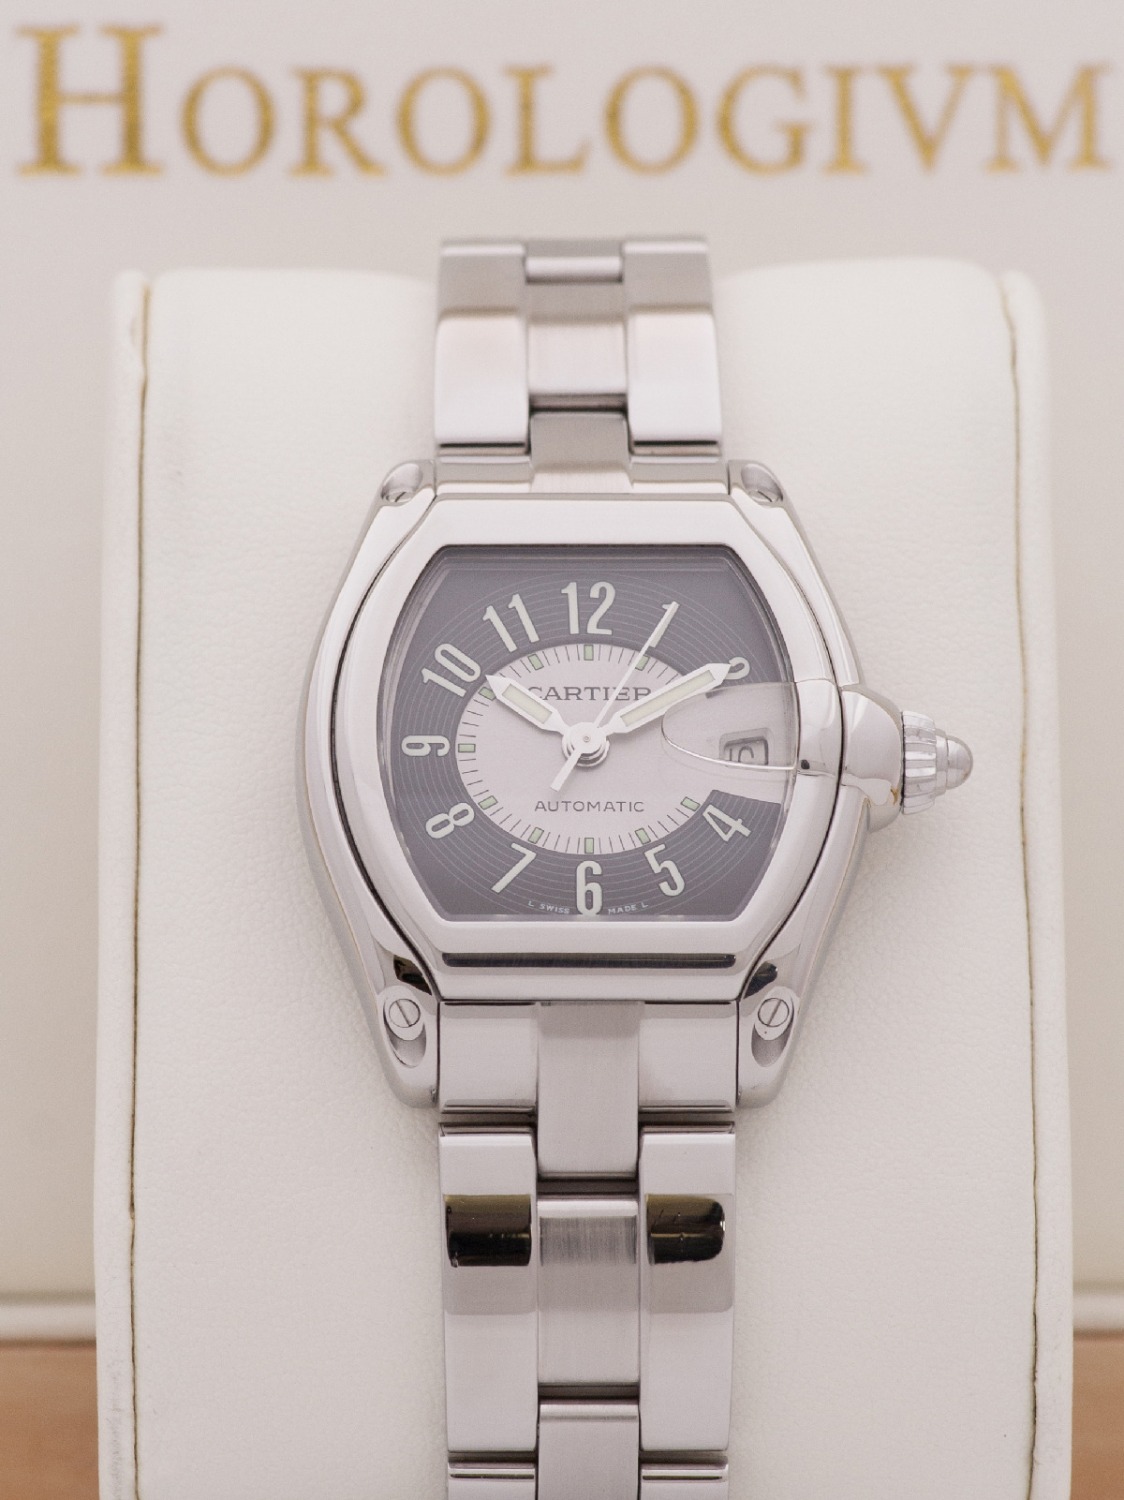 Cartier Roadster Automatic watch, silver